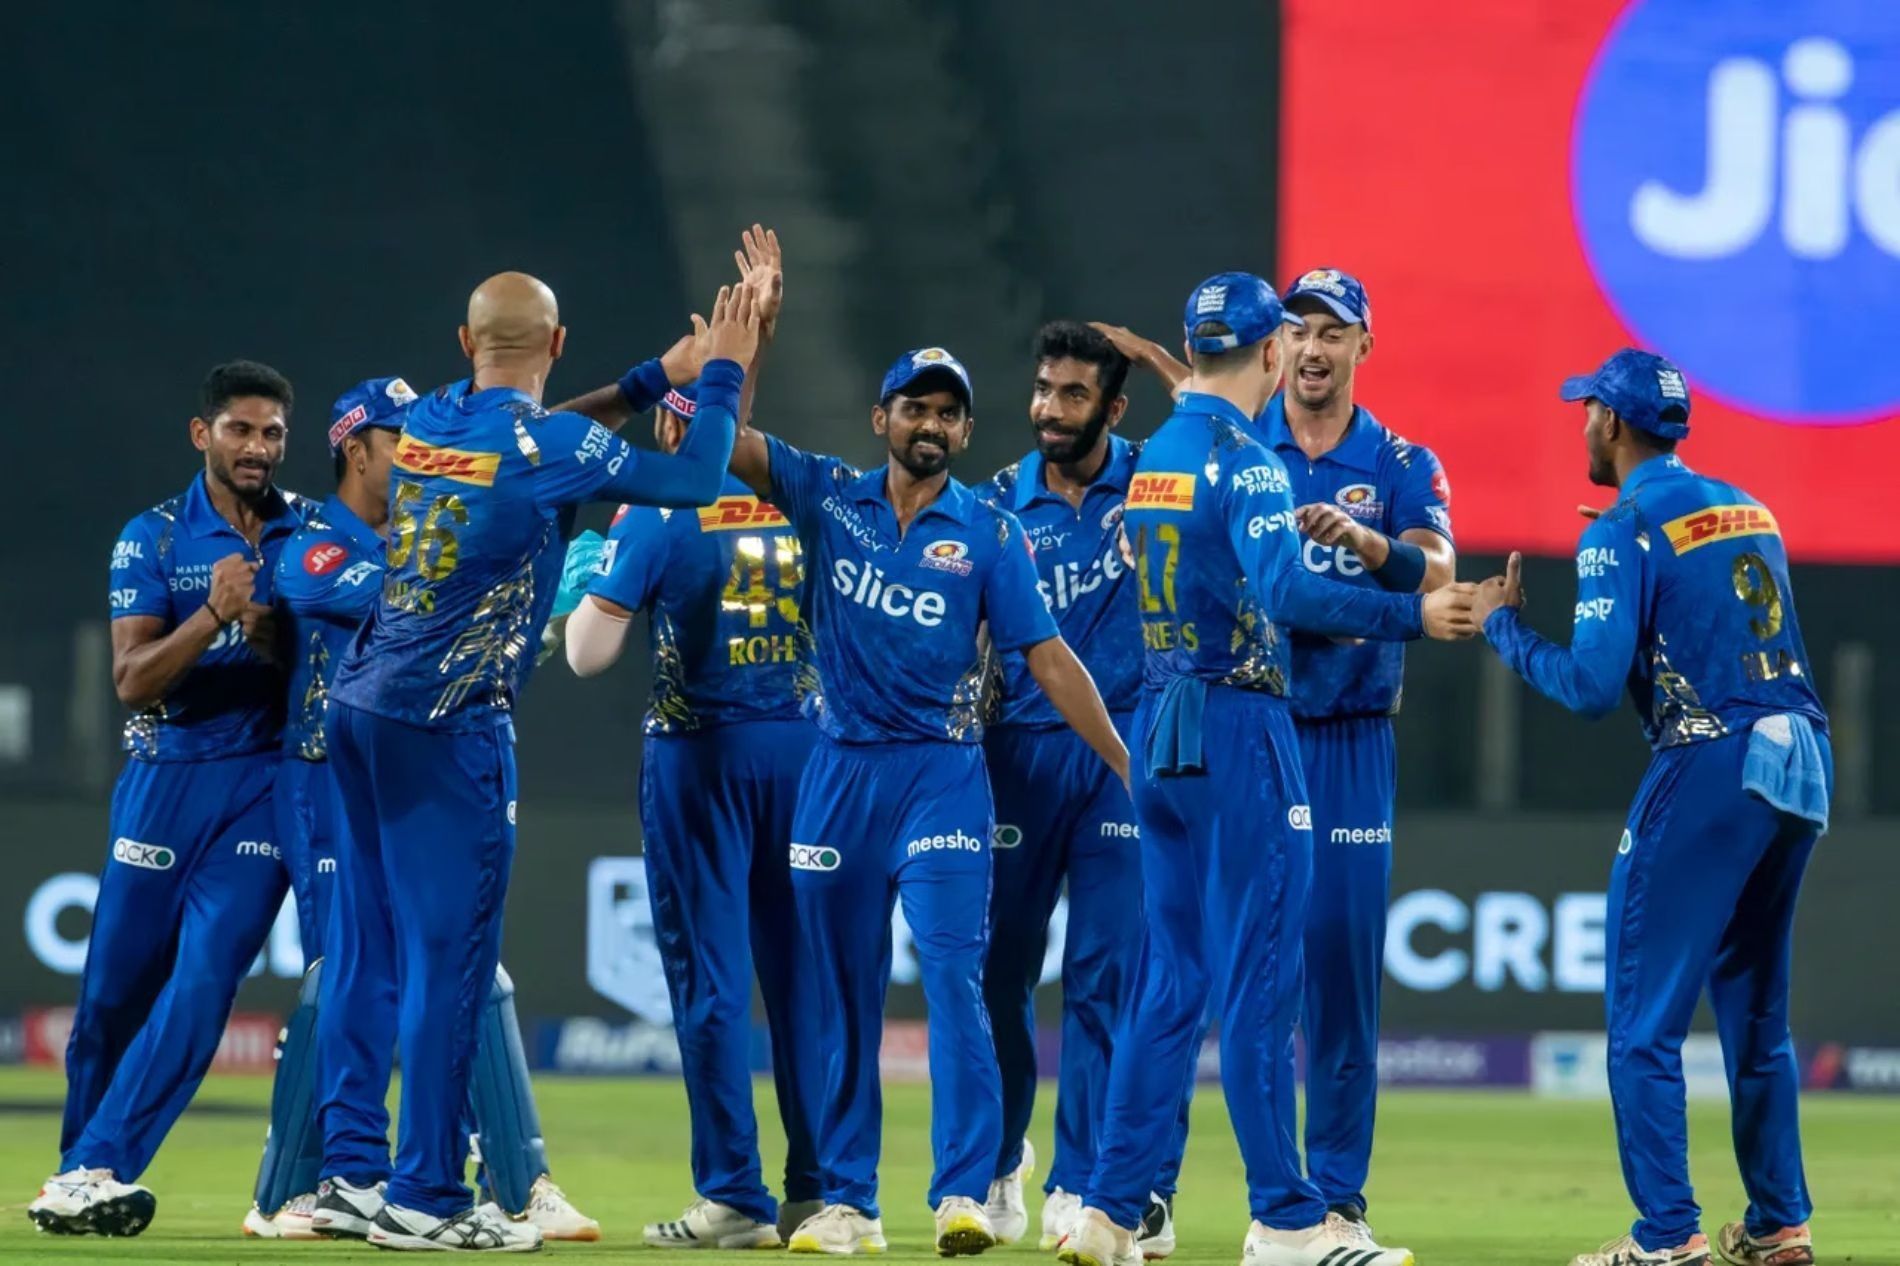 The Mumbai Indians finished at the bottom of the table in IPL 2022. [P/C: iplt20.com]